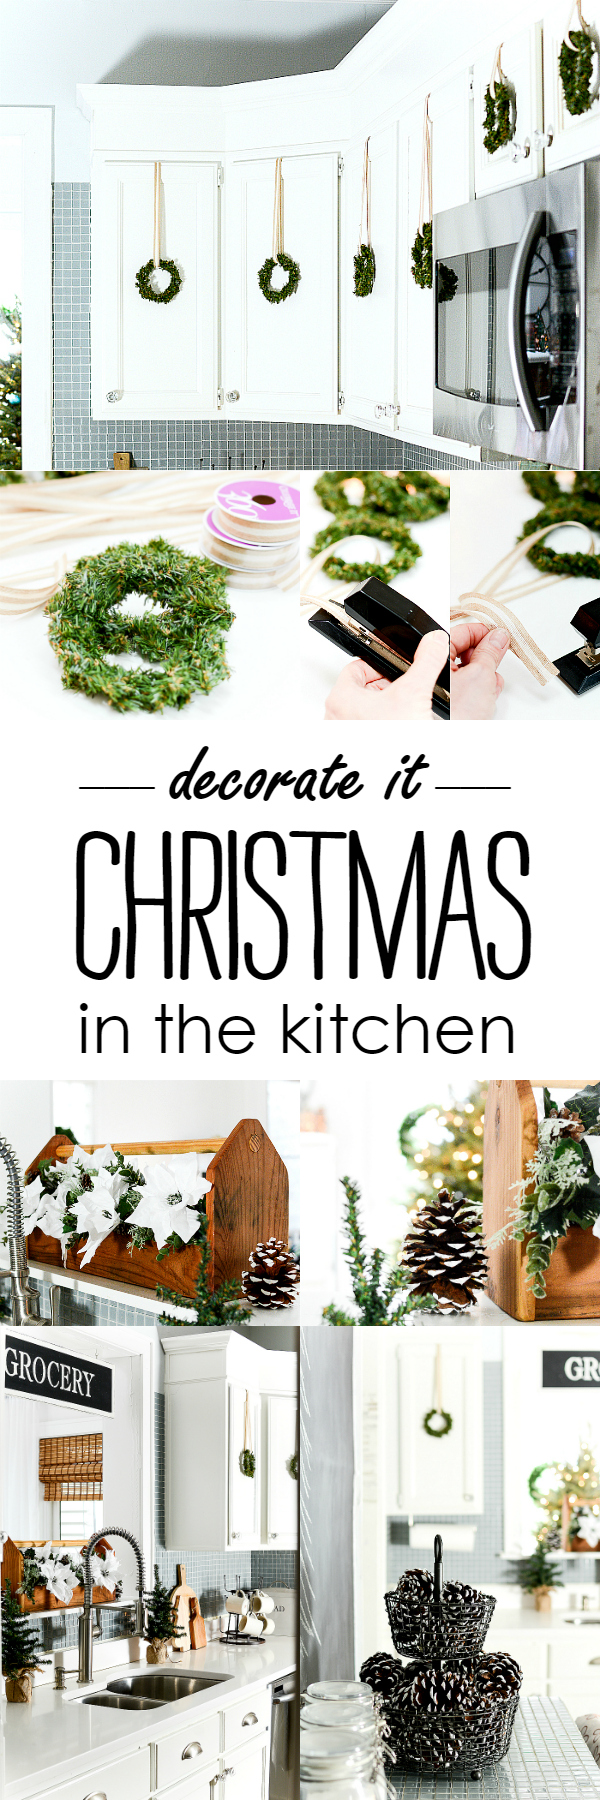 Christmas Kitchen Decorating Ideas with Mini Wreaths @It All Started With Paint www.itallstartedwithpaint.com